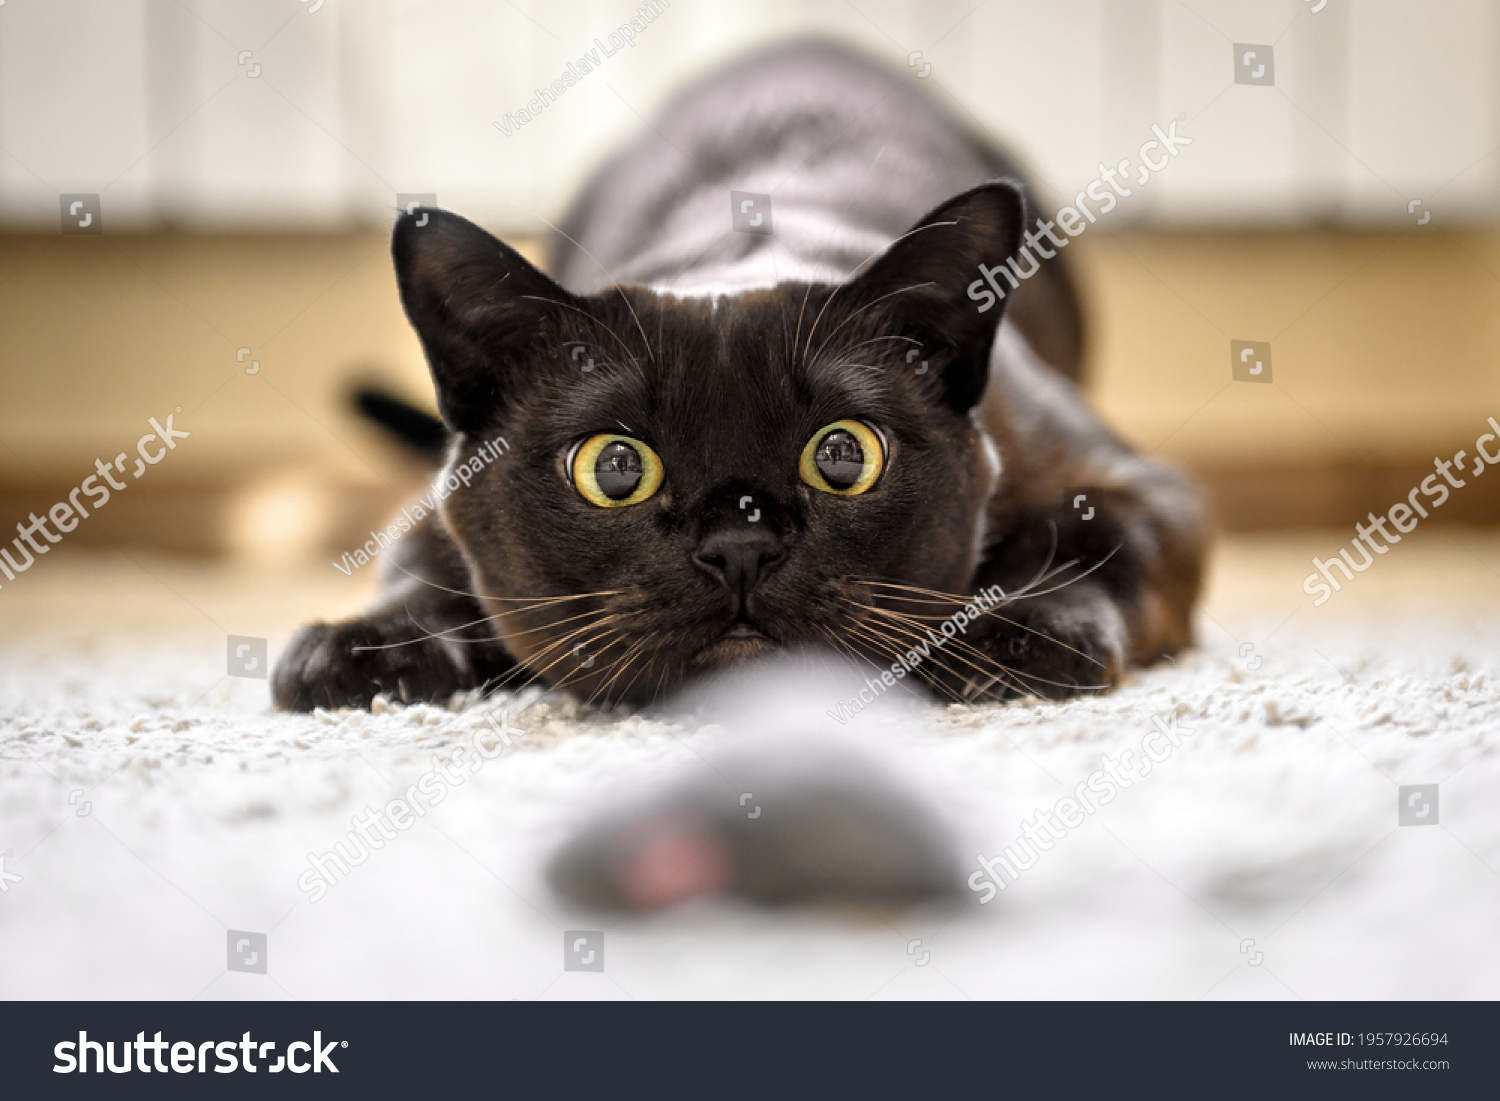 Cat hunting to toy mouse at home, Burmese cat face before pounce, funny domestic kitten plays in house. Look of playful Burma cat catching food indoor. Eyes of happy pet playing and wanting to attack #1957926694